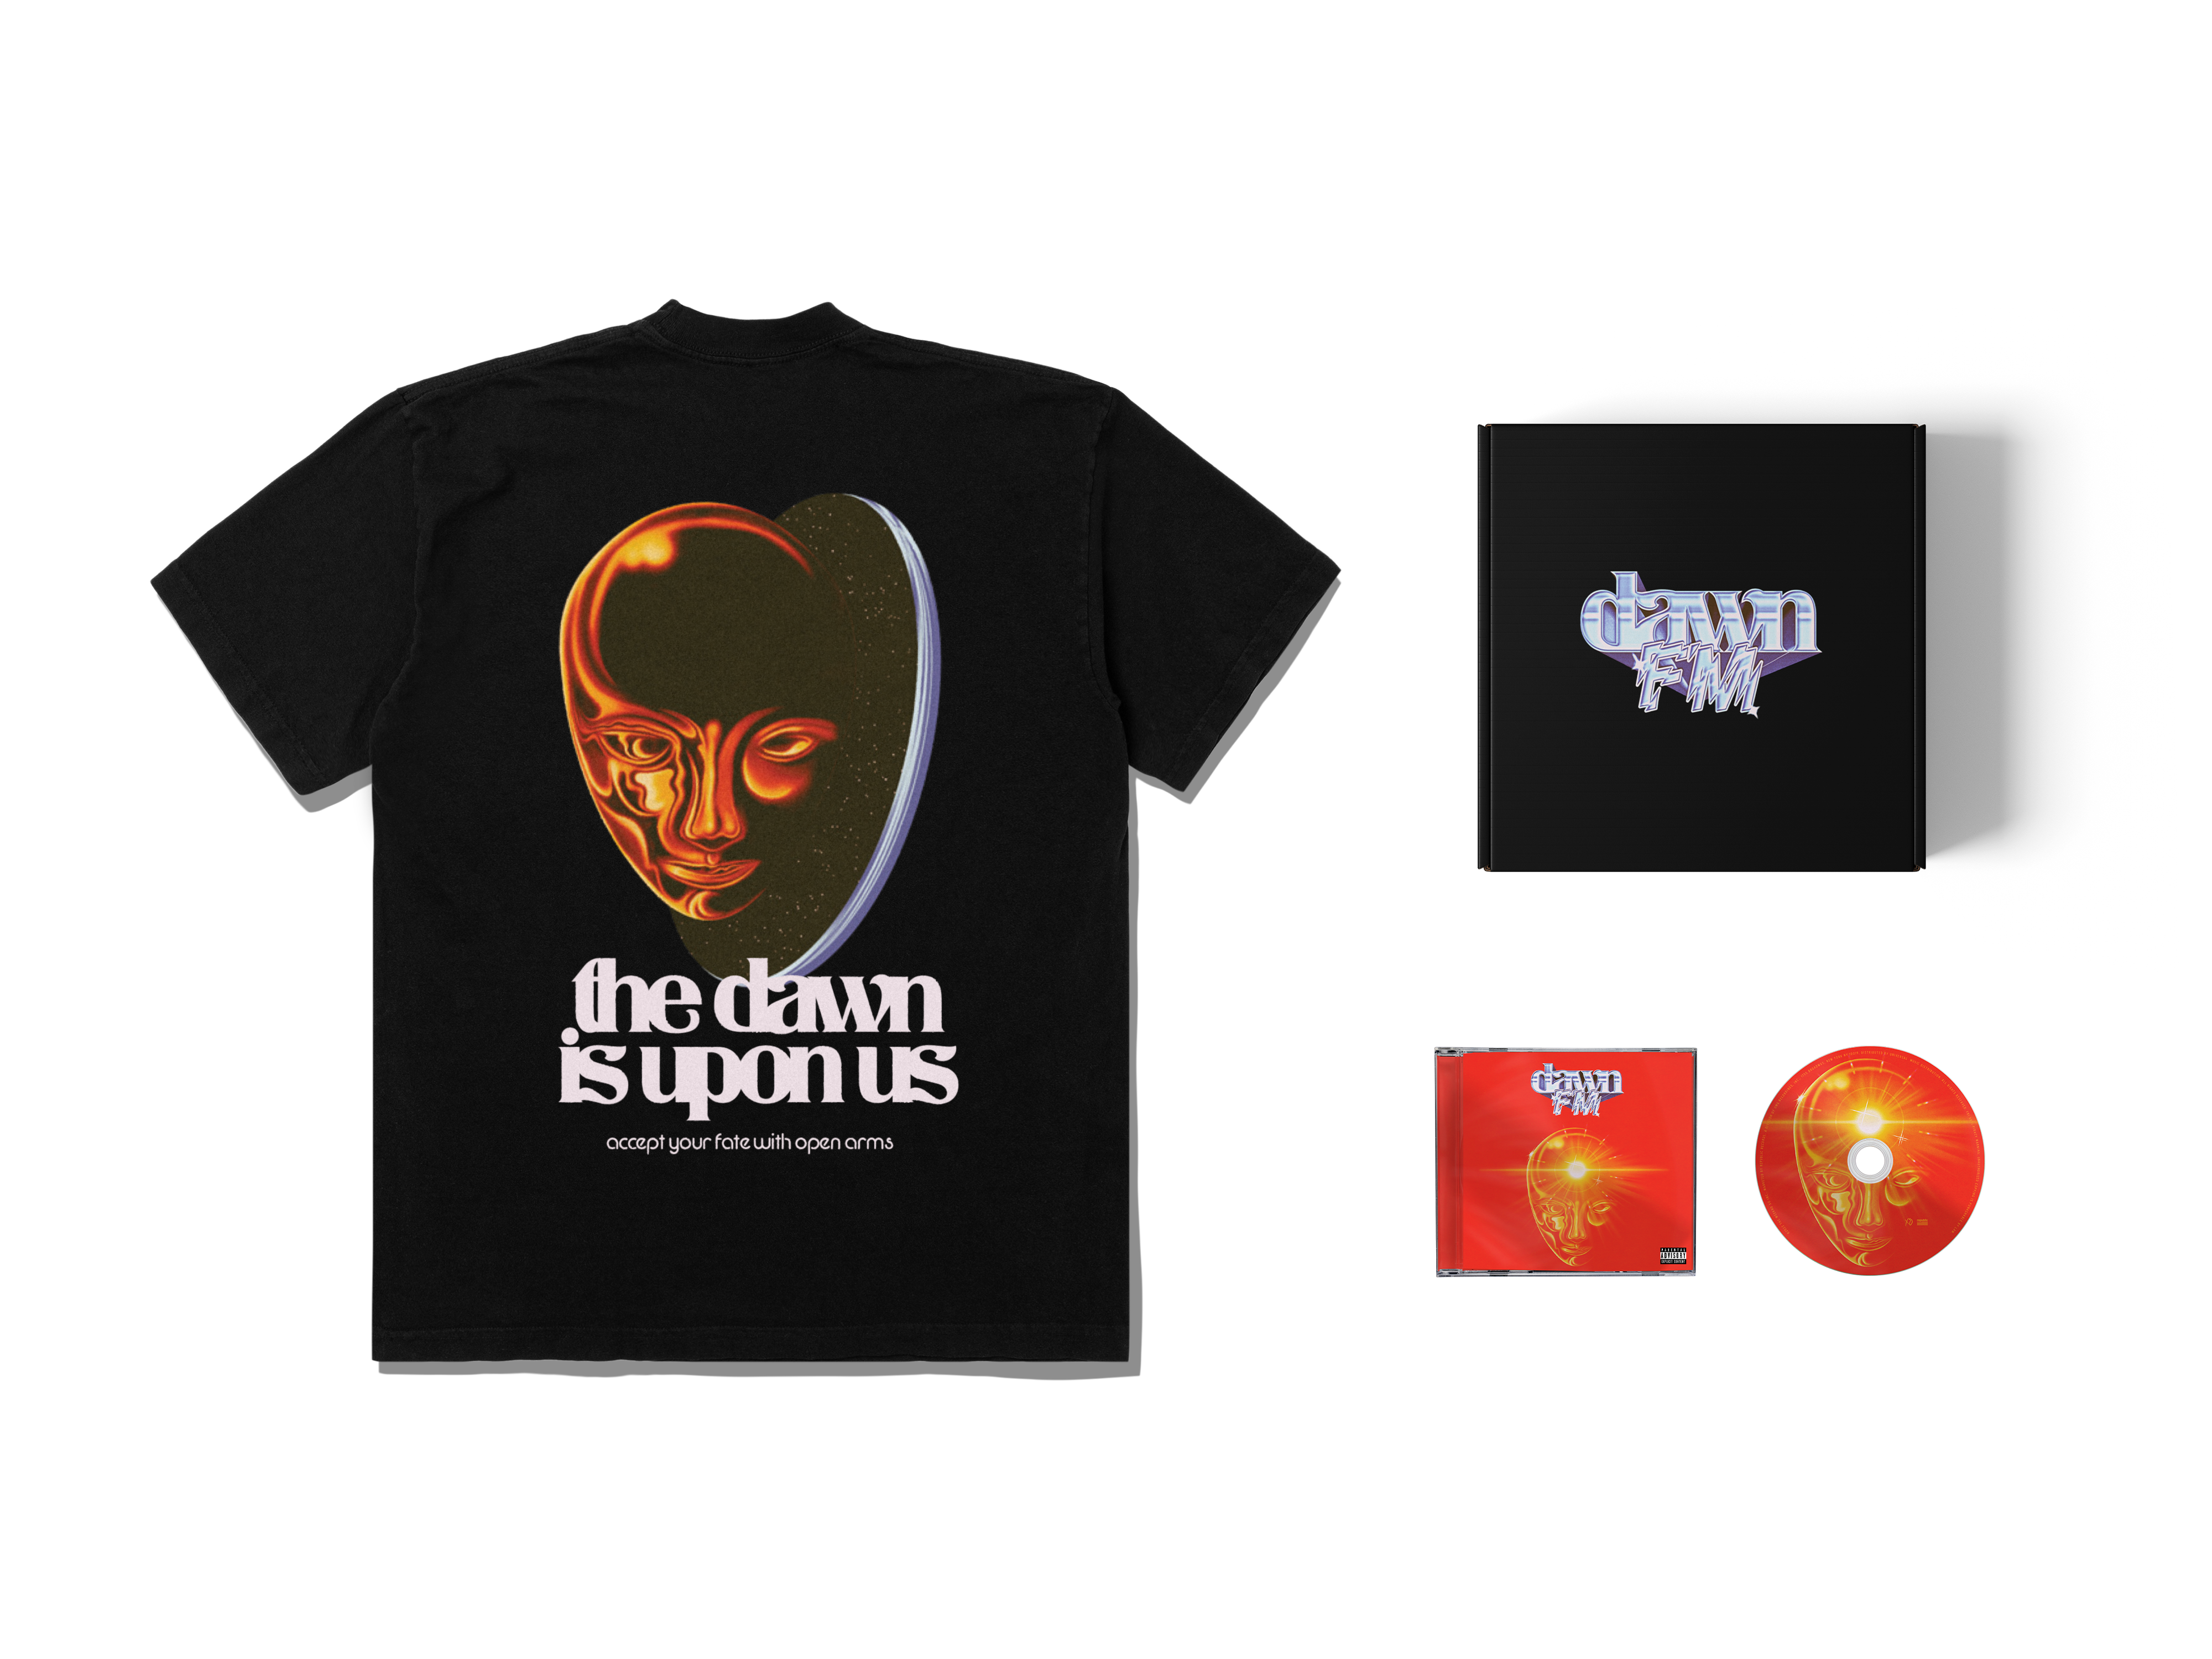 The Weeknd - Dawn Fm Accept Your Fate Tee Box Set